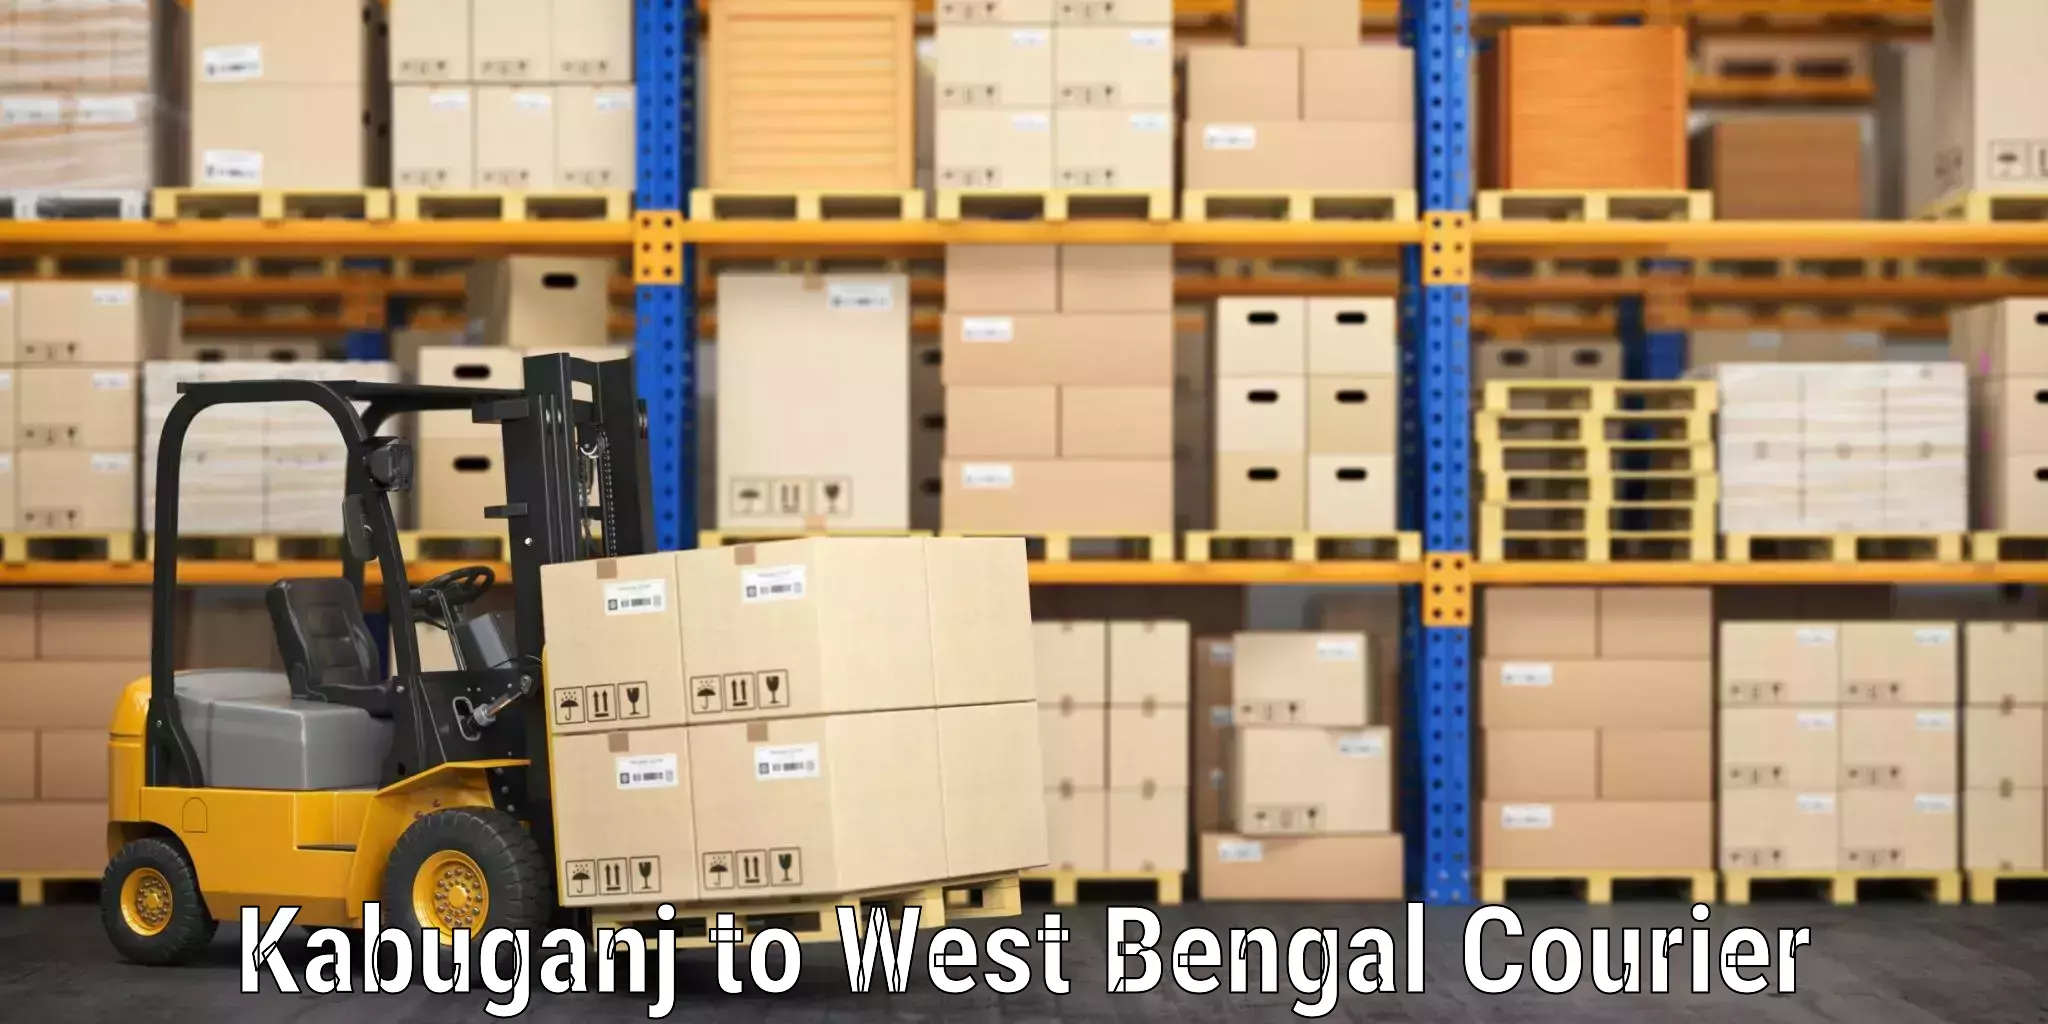 Baggage transport services in Kabuganj to West Bengal